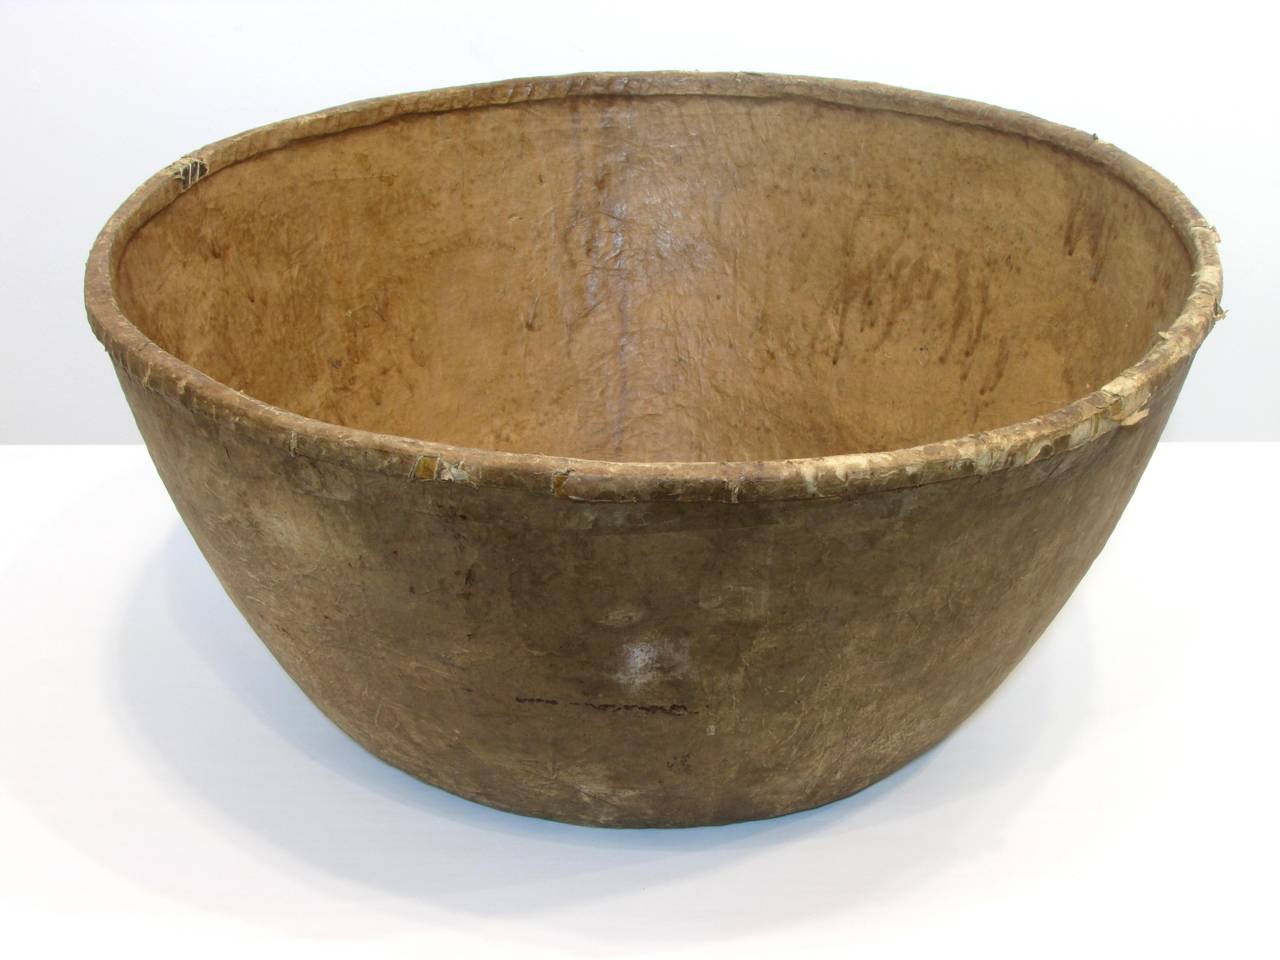 Vintage very large fiber bowl covered in brown paper with covered split bamboo rim